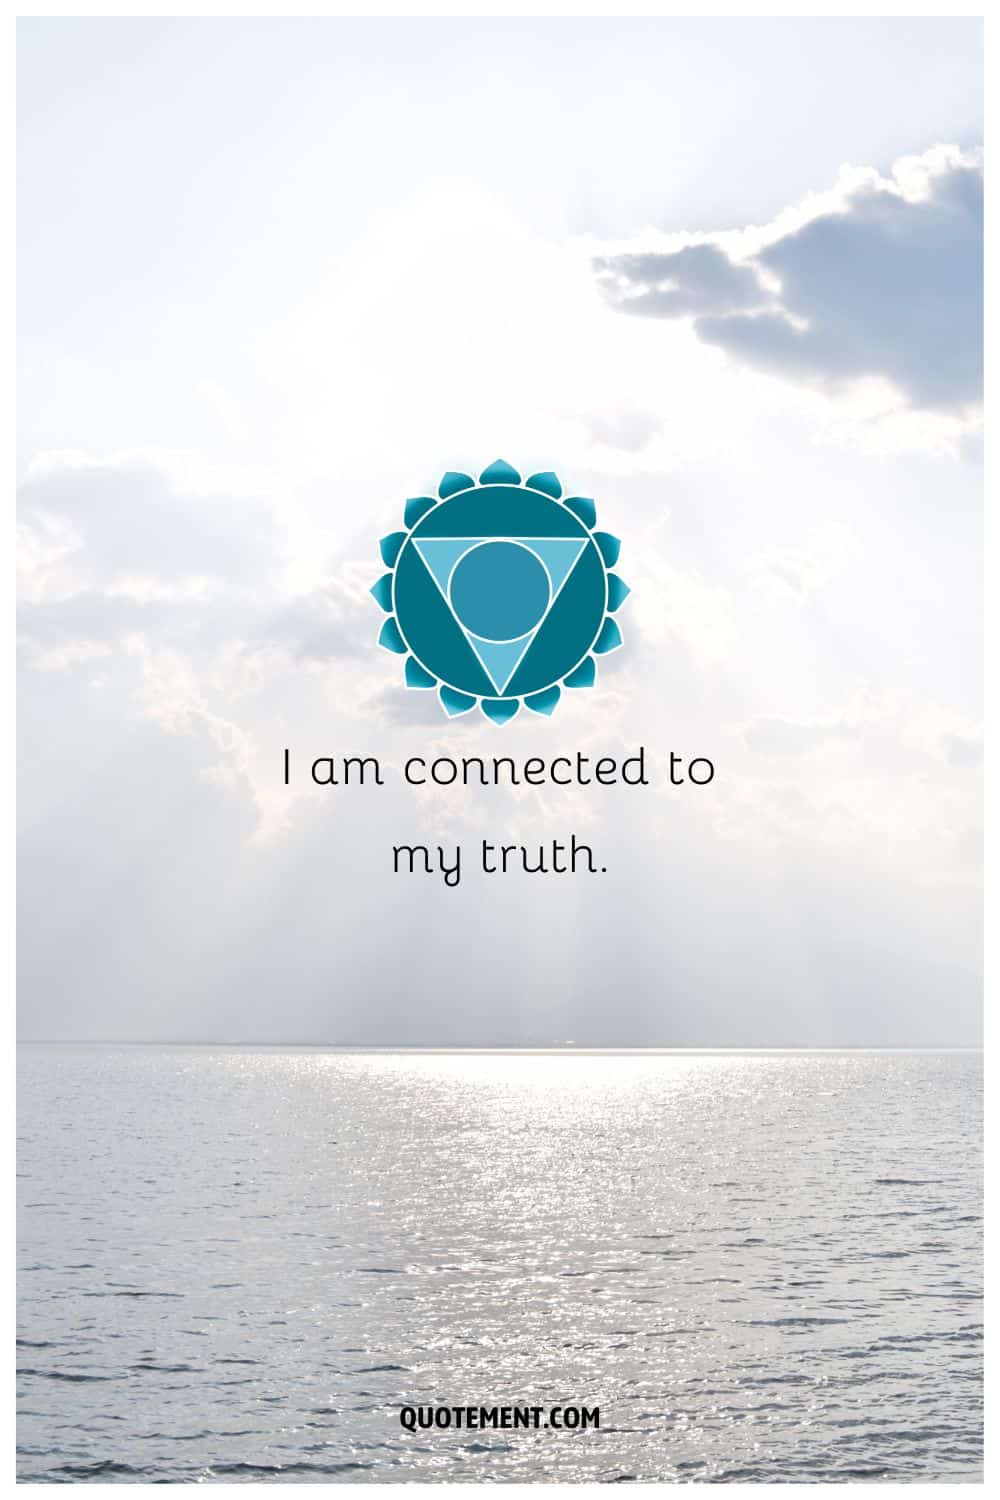 “I am connected to my truth.”